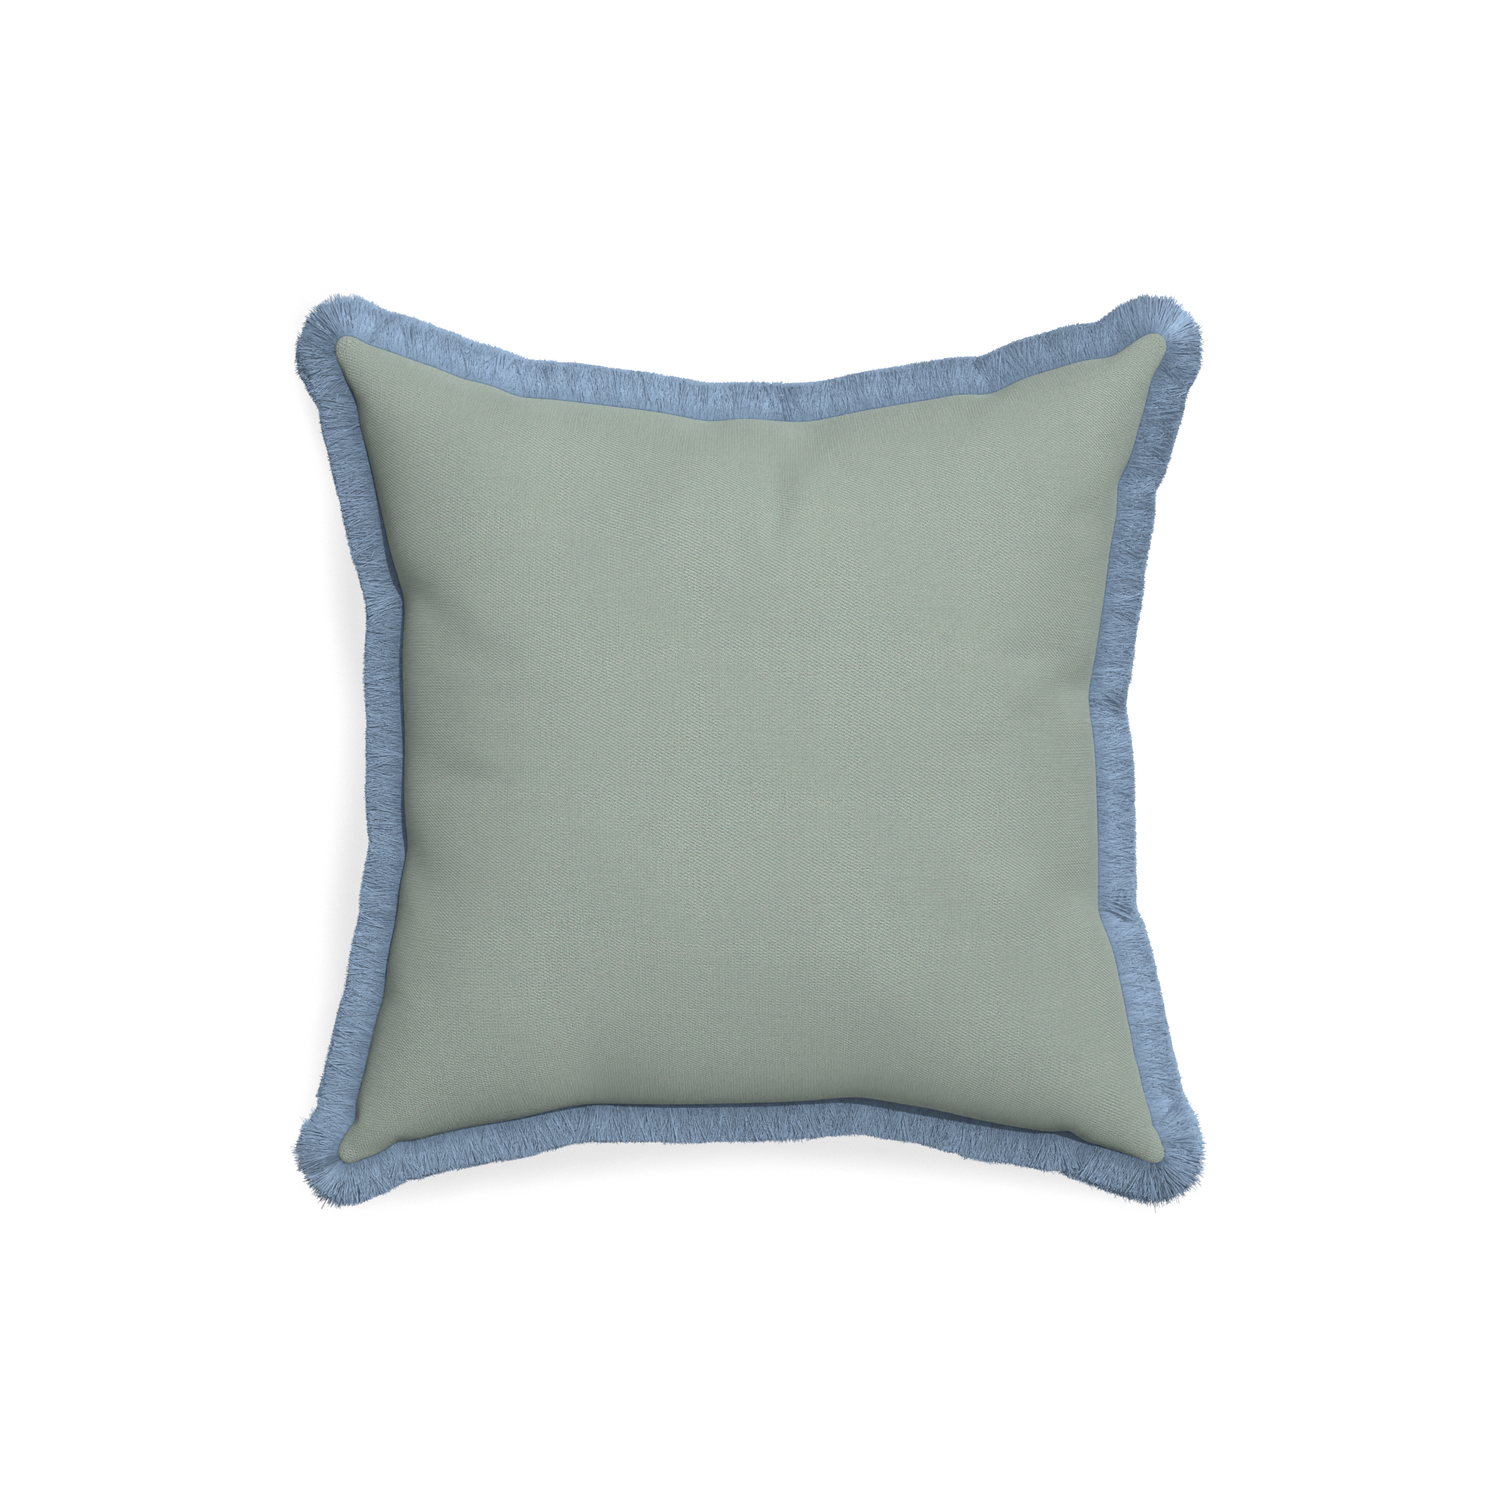 18-square sage custom pillow with sky fringe on white background